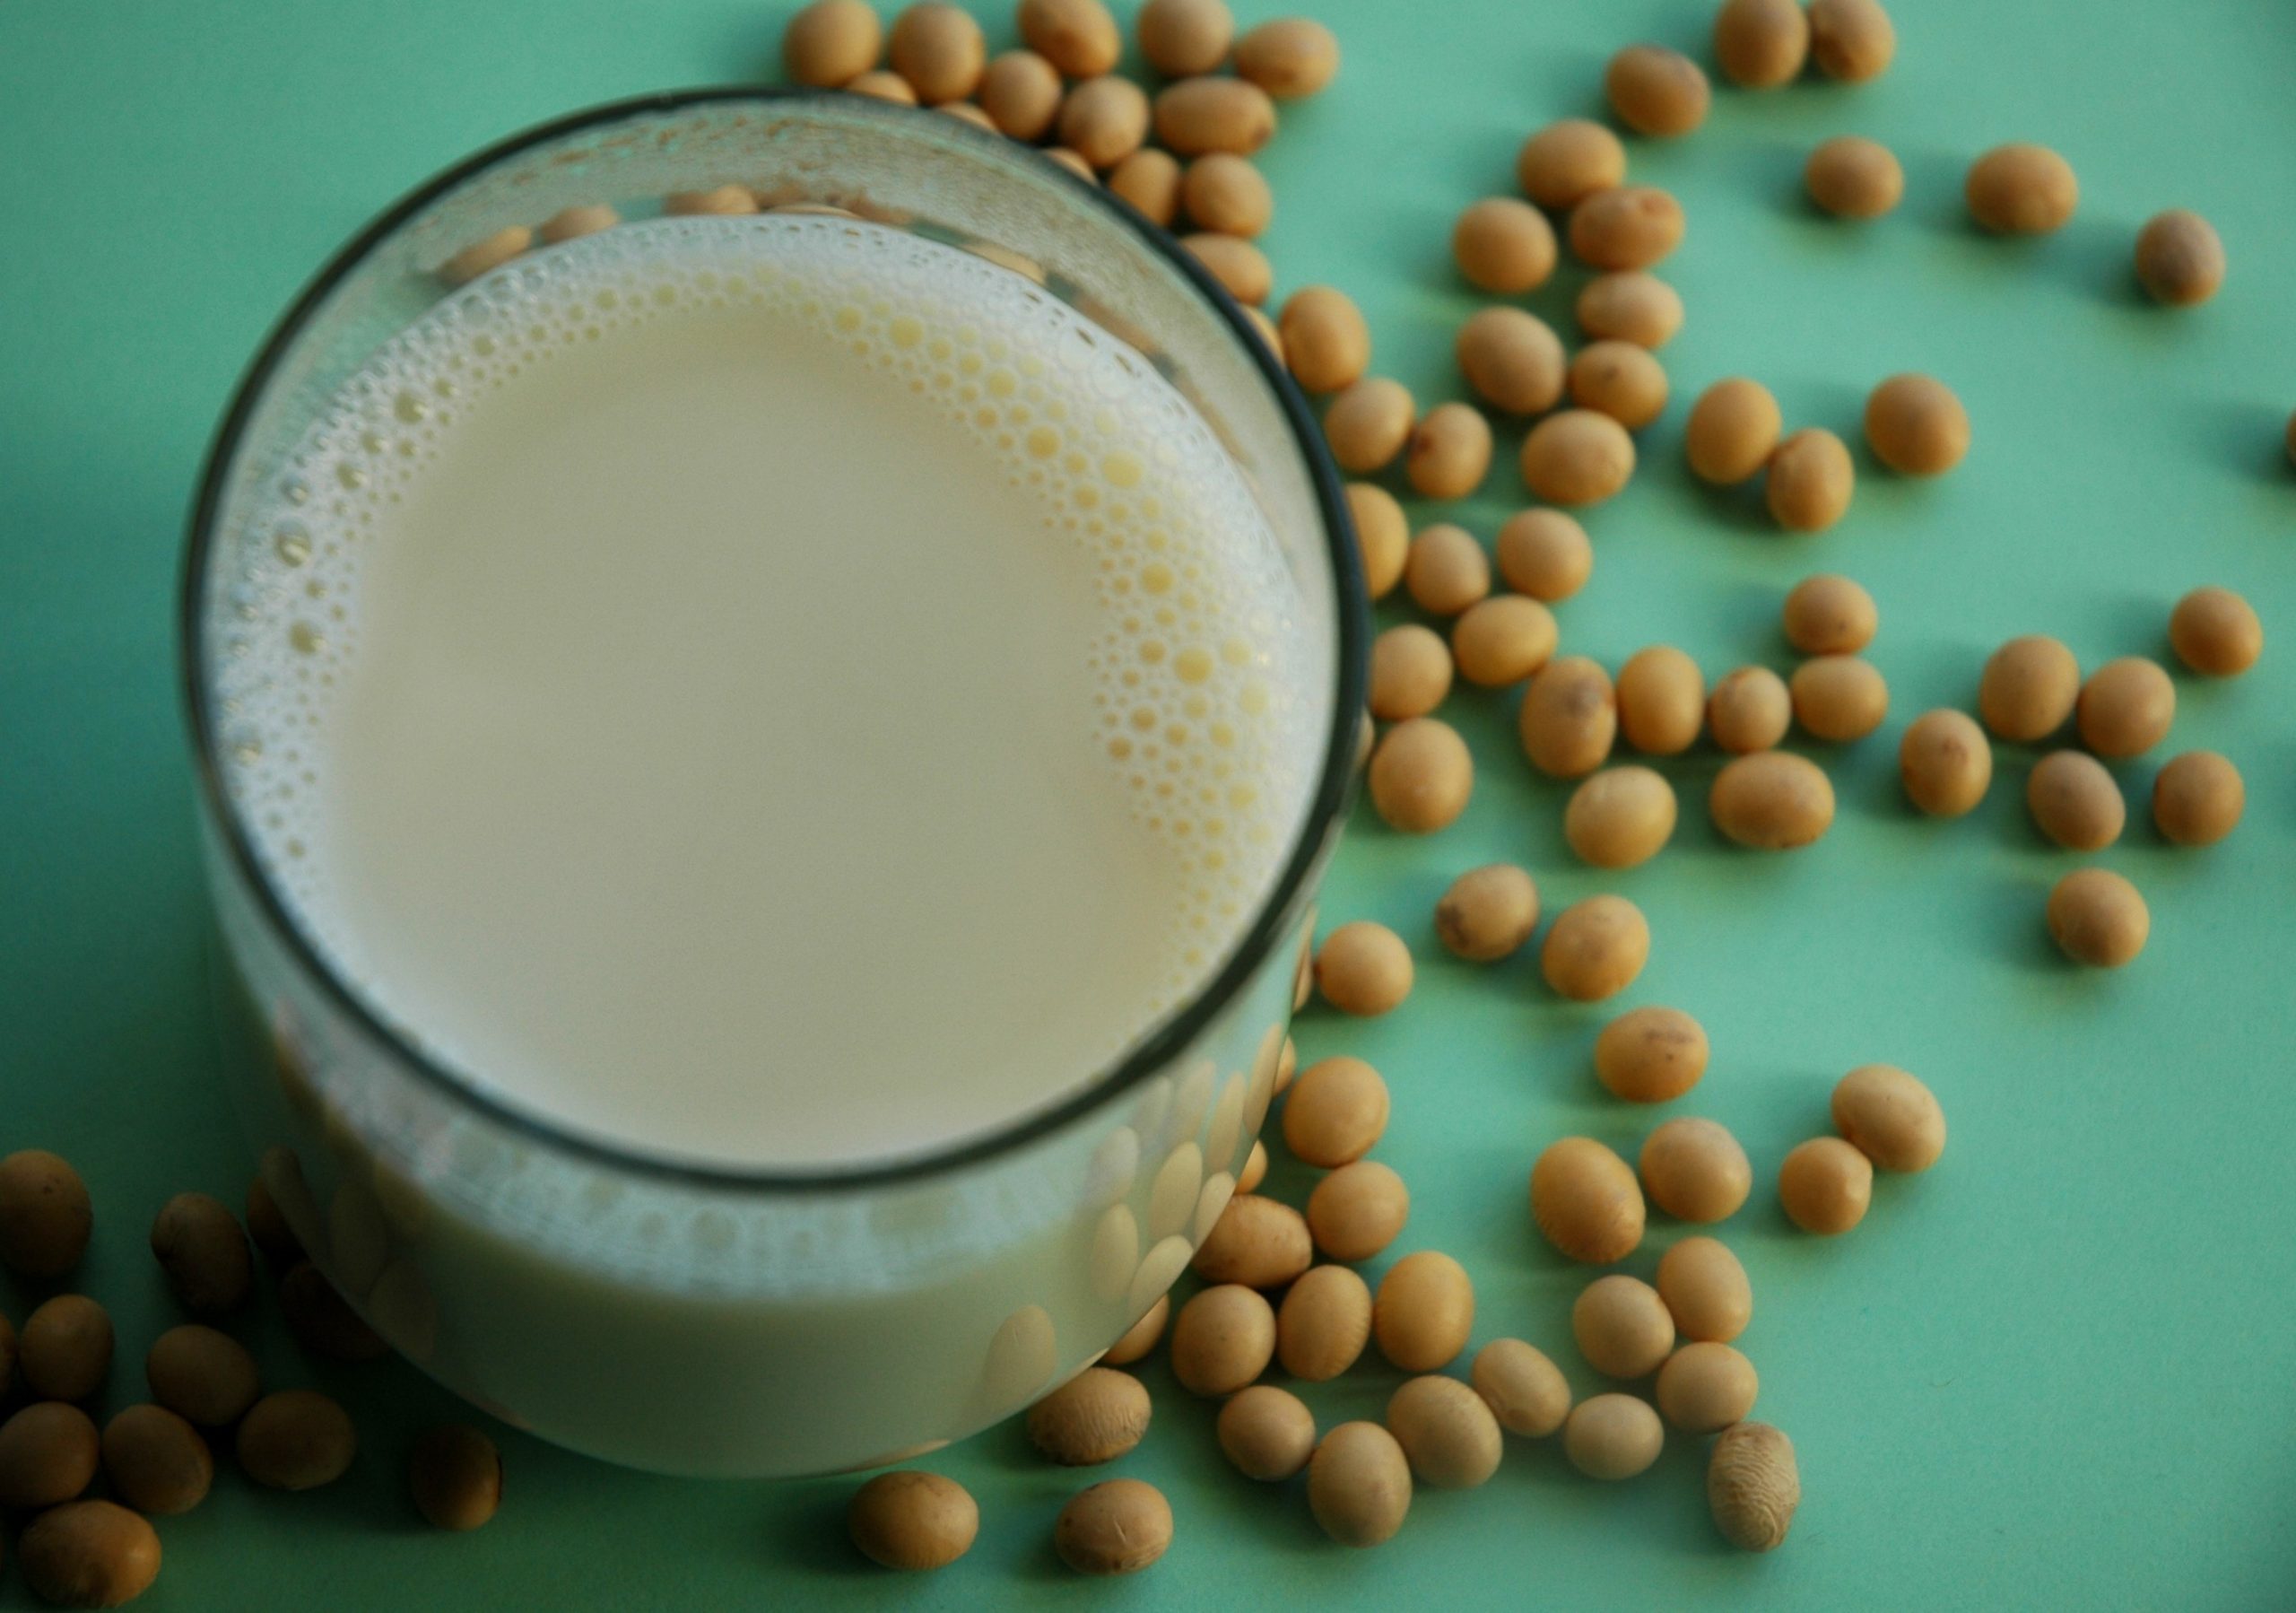 Is Soy As Sustainable As Vegetarians Want It To Be?